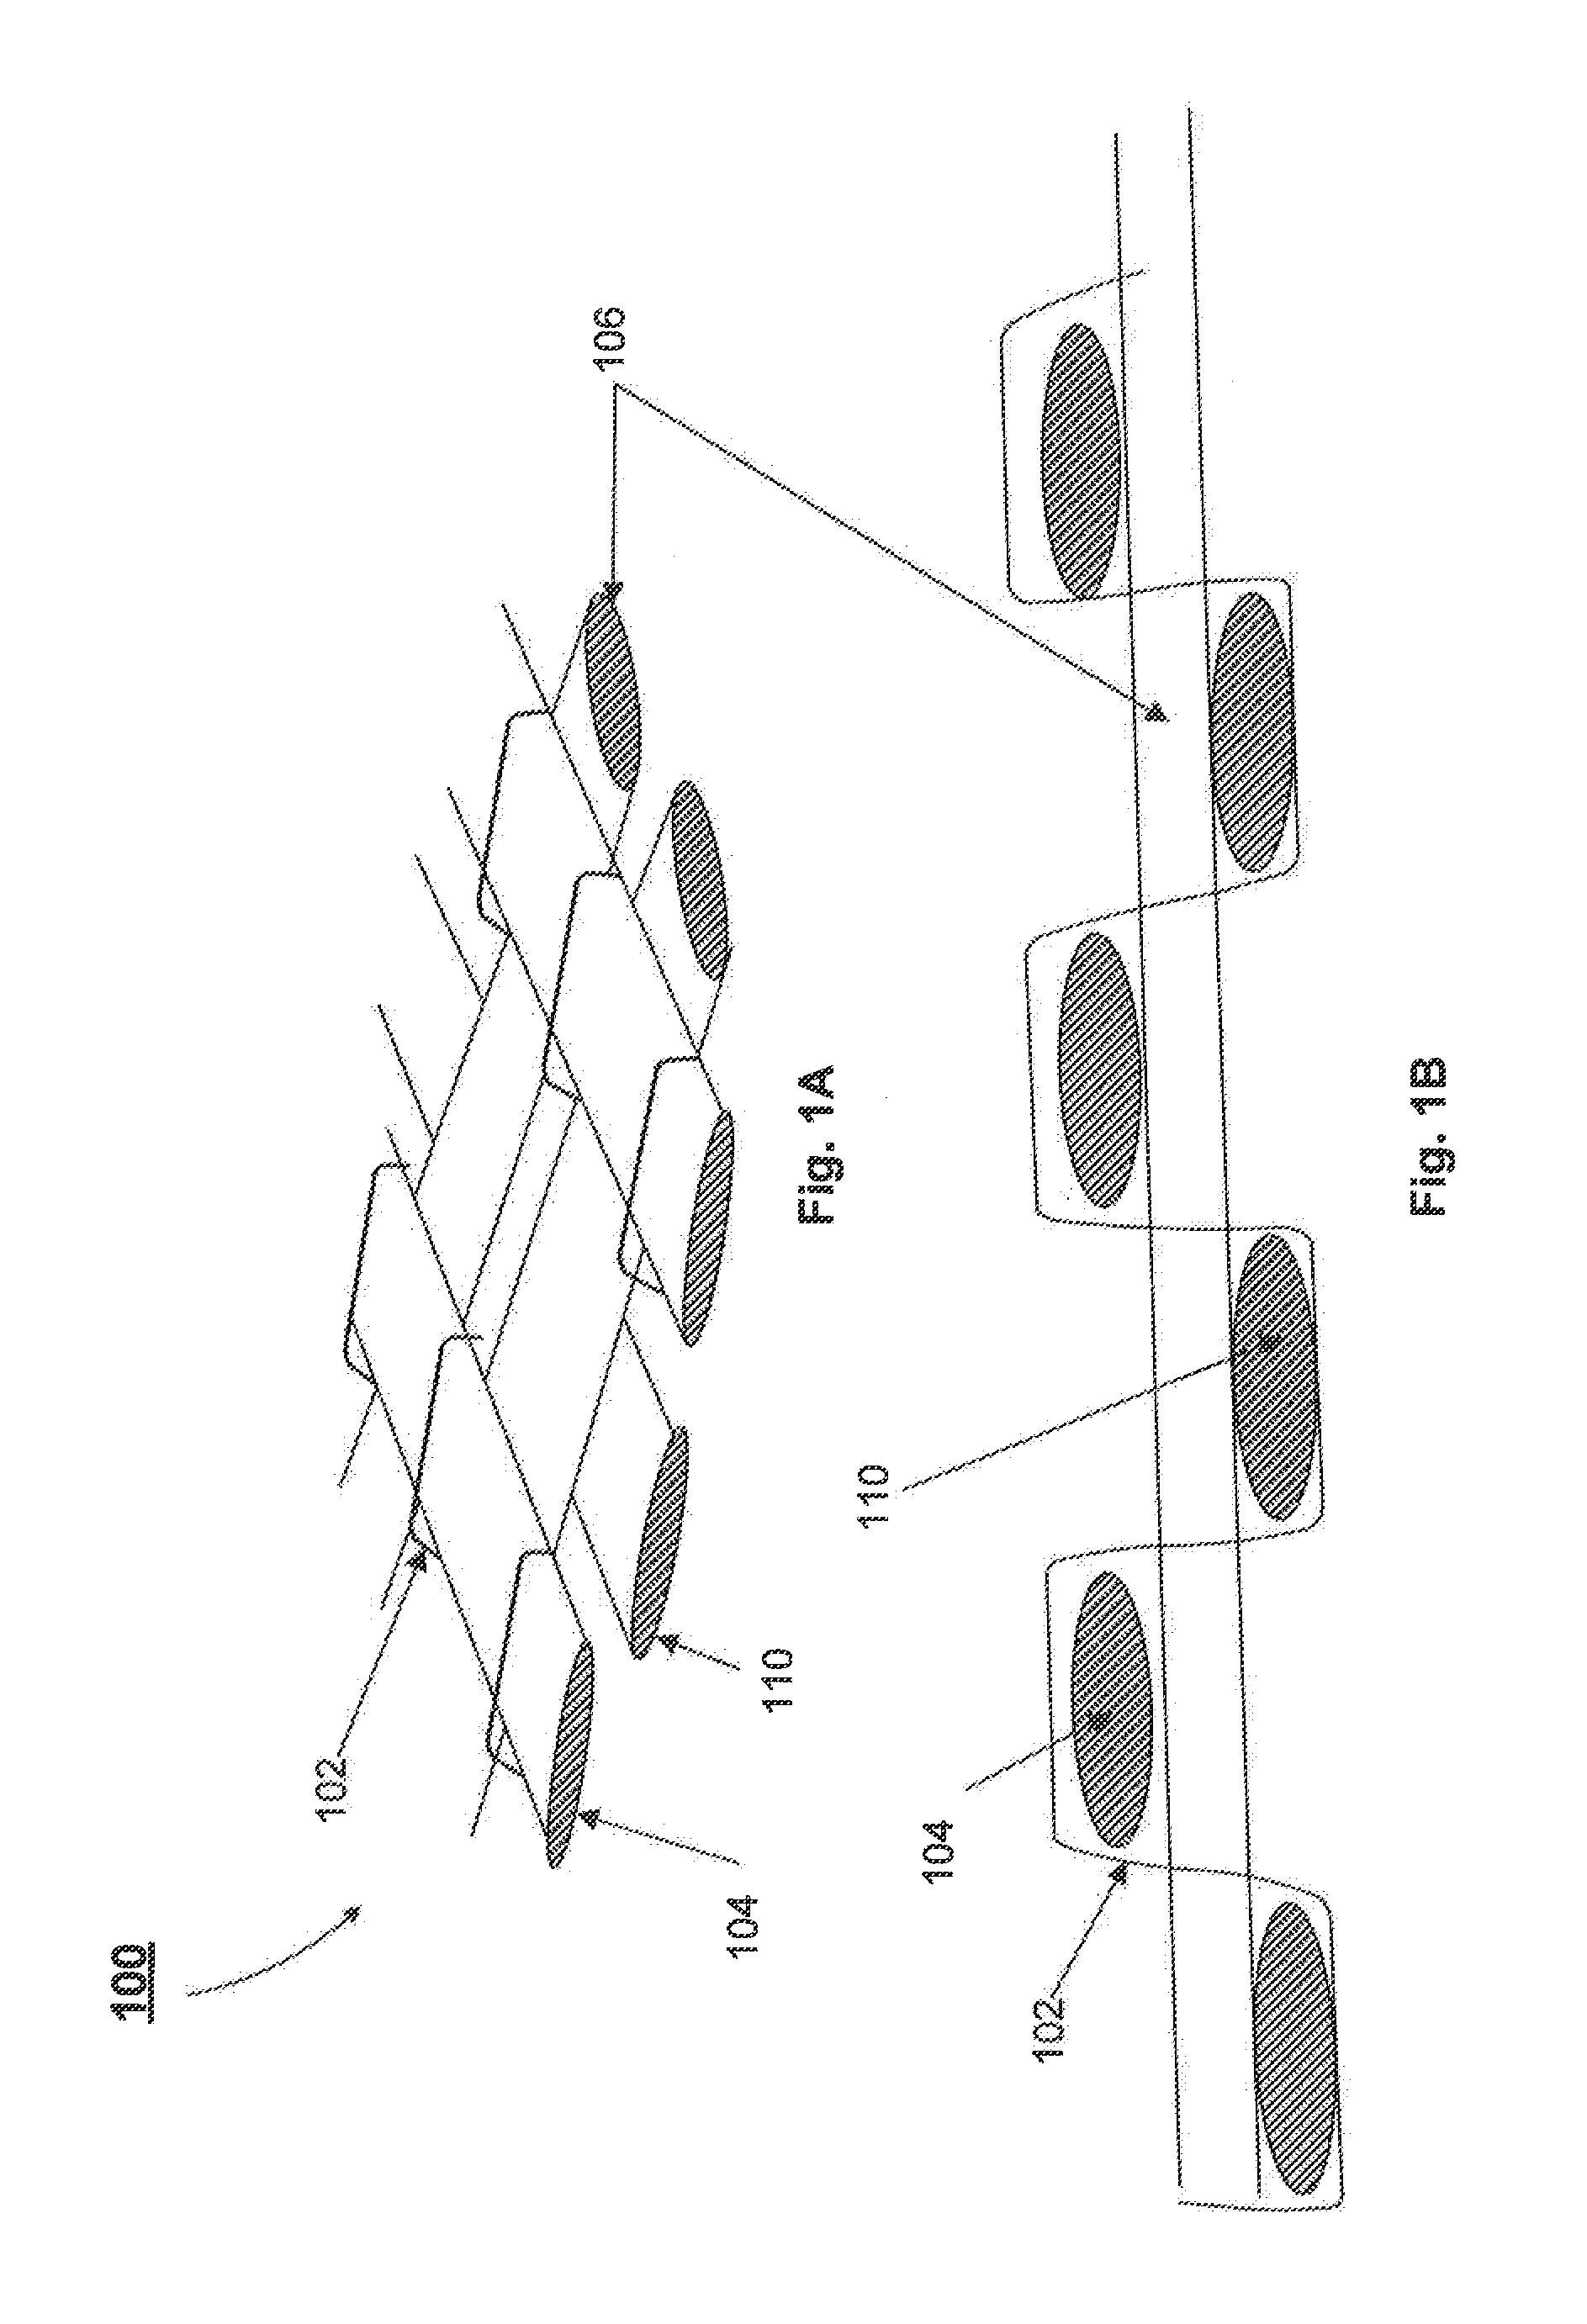 Systems and methods for reduced crimp carbon fiber helical fabric